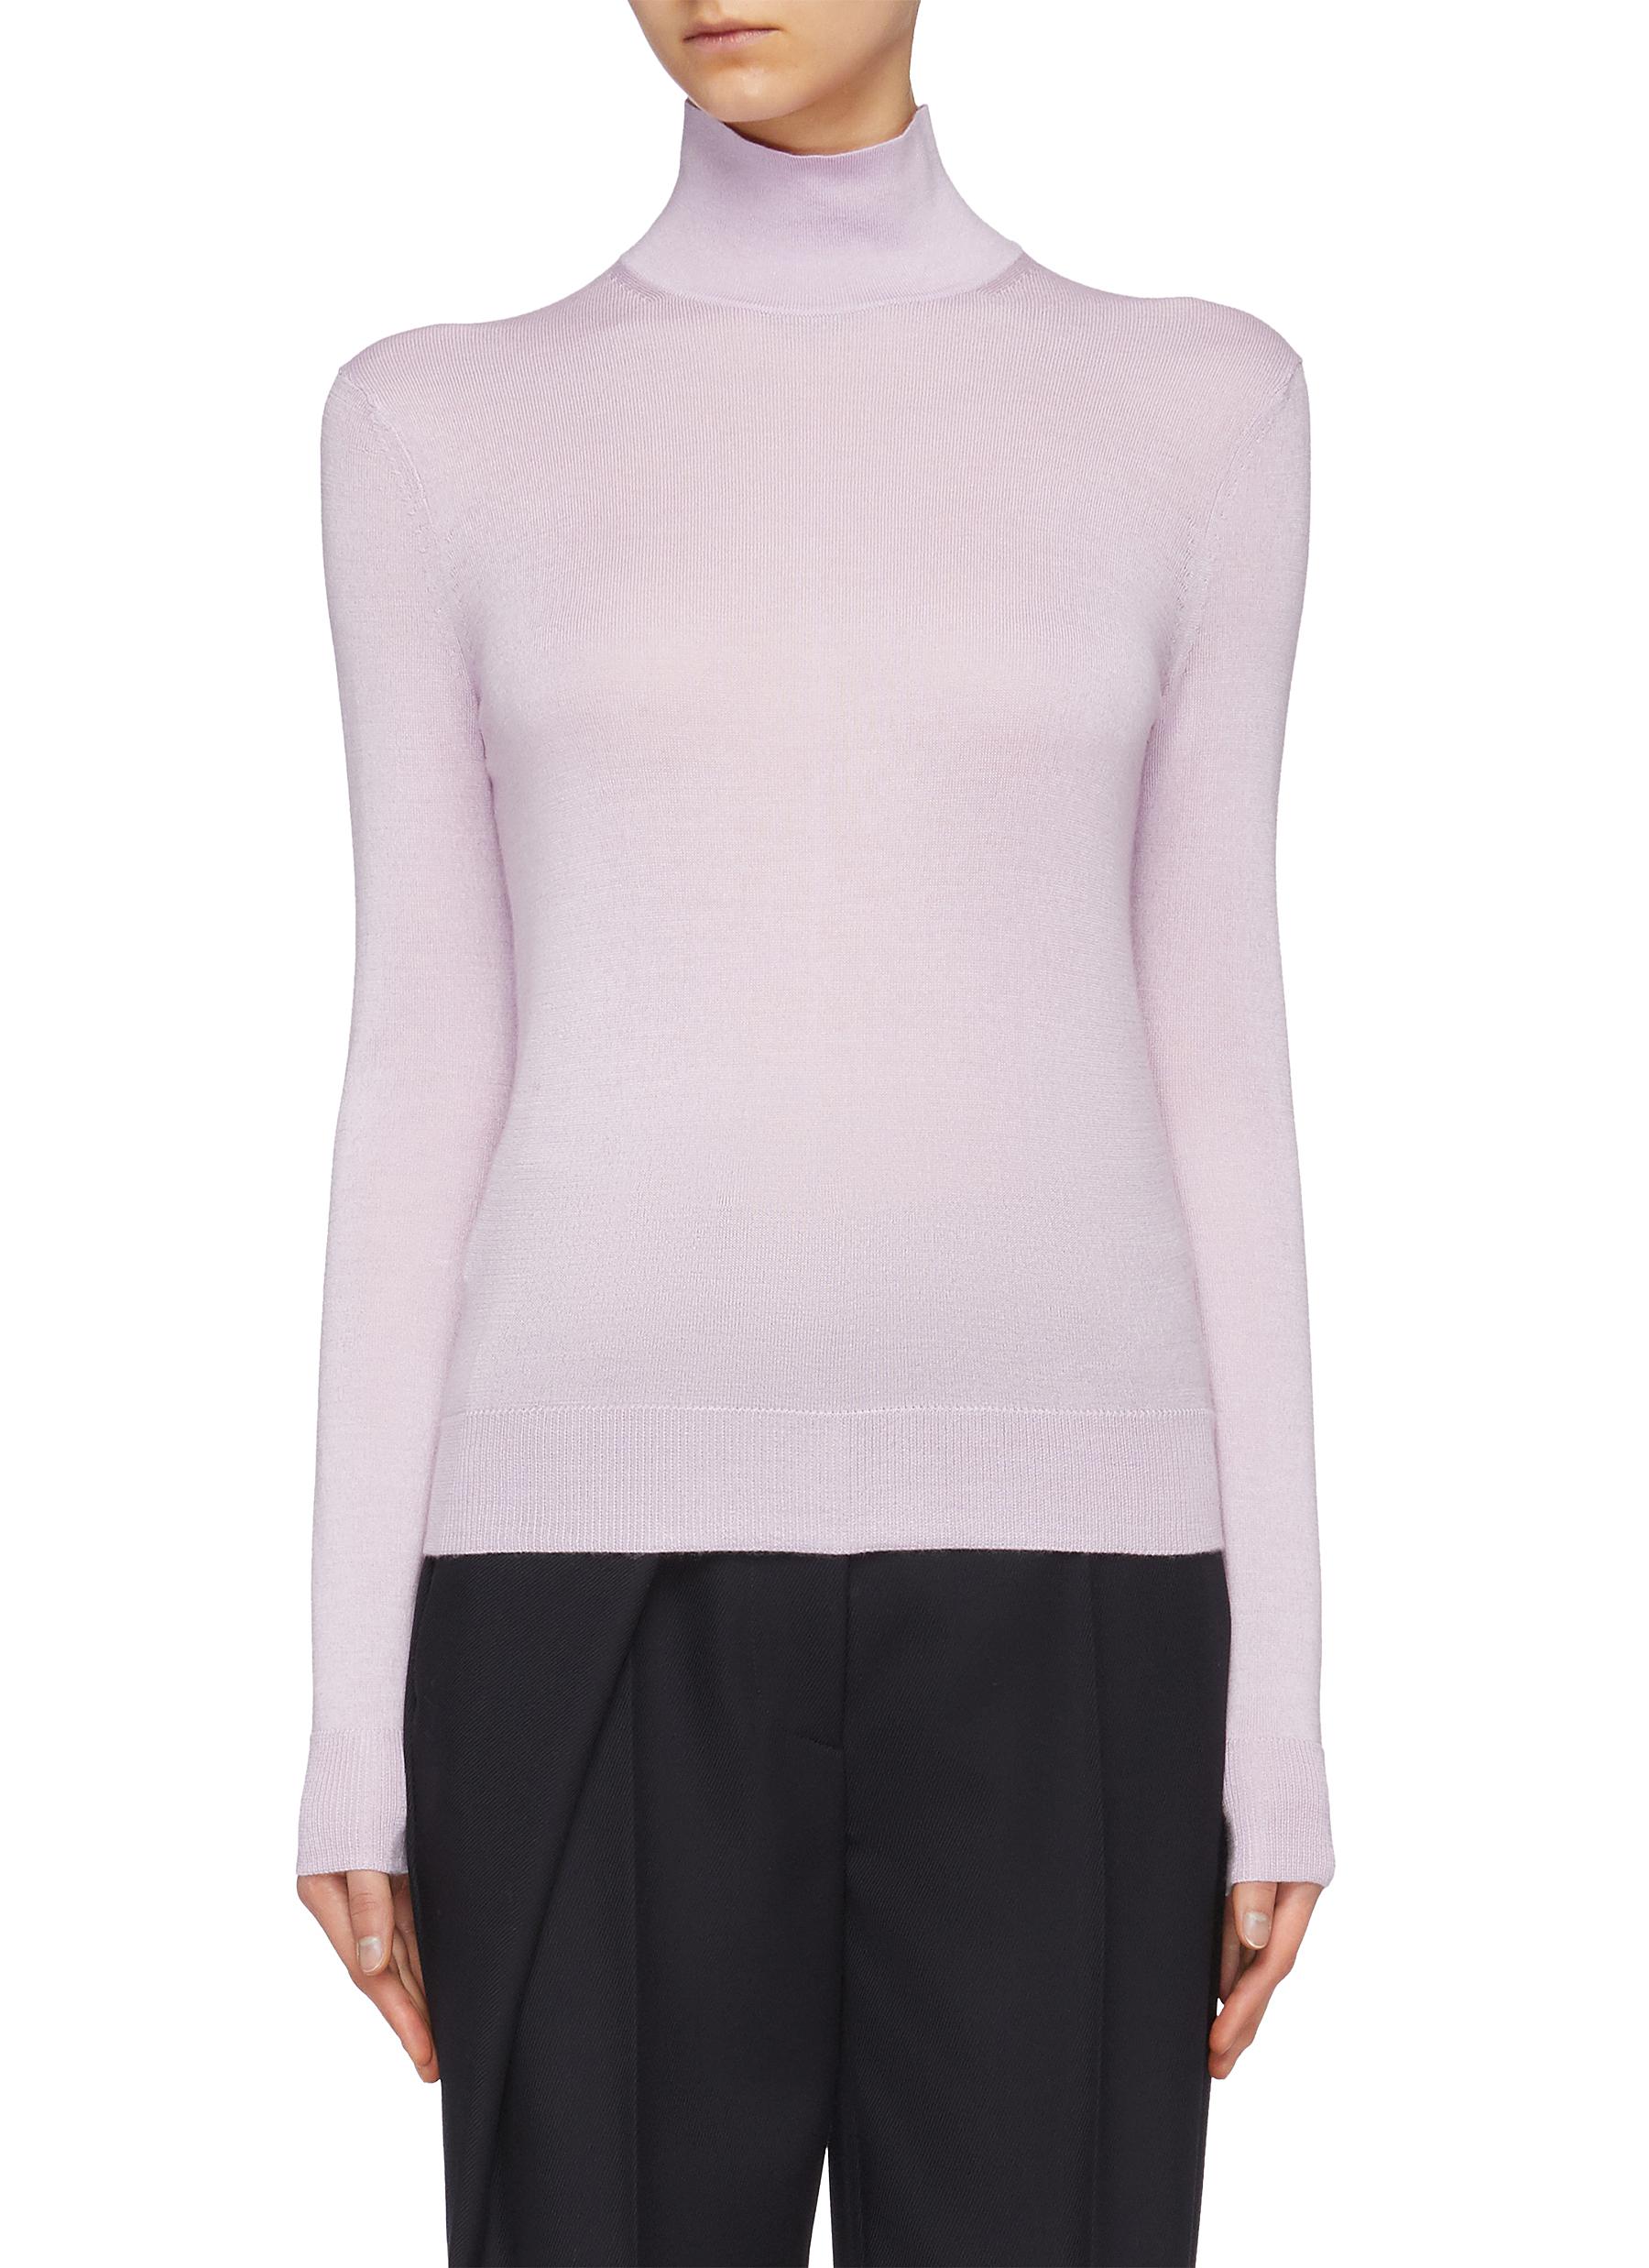 Silk blend turtleneck sweater by Theory | Coshio Online Shop